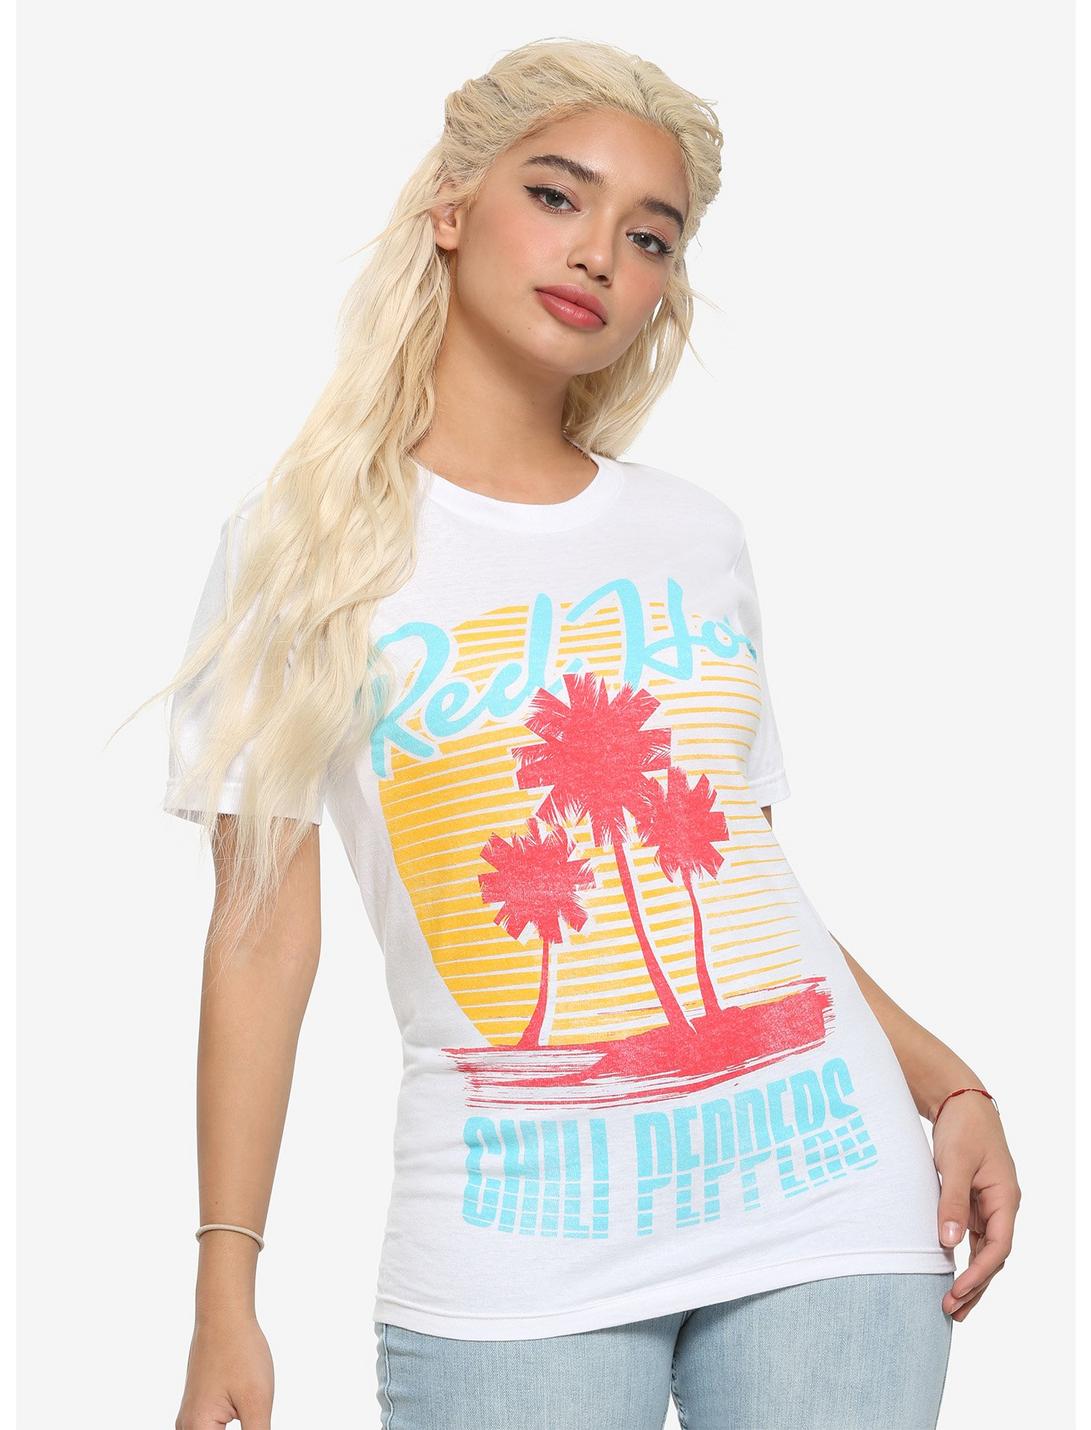 Red Hot Chili Peppers Retro Palm Tree Girls T-Shirt, WHITE, hi-res